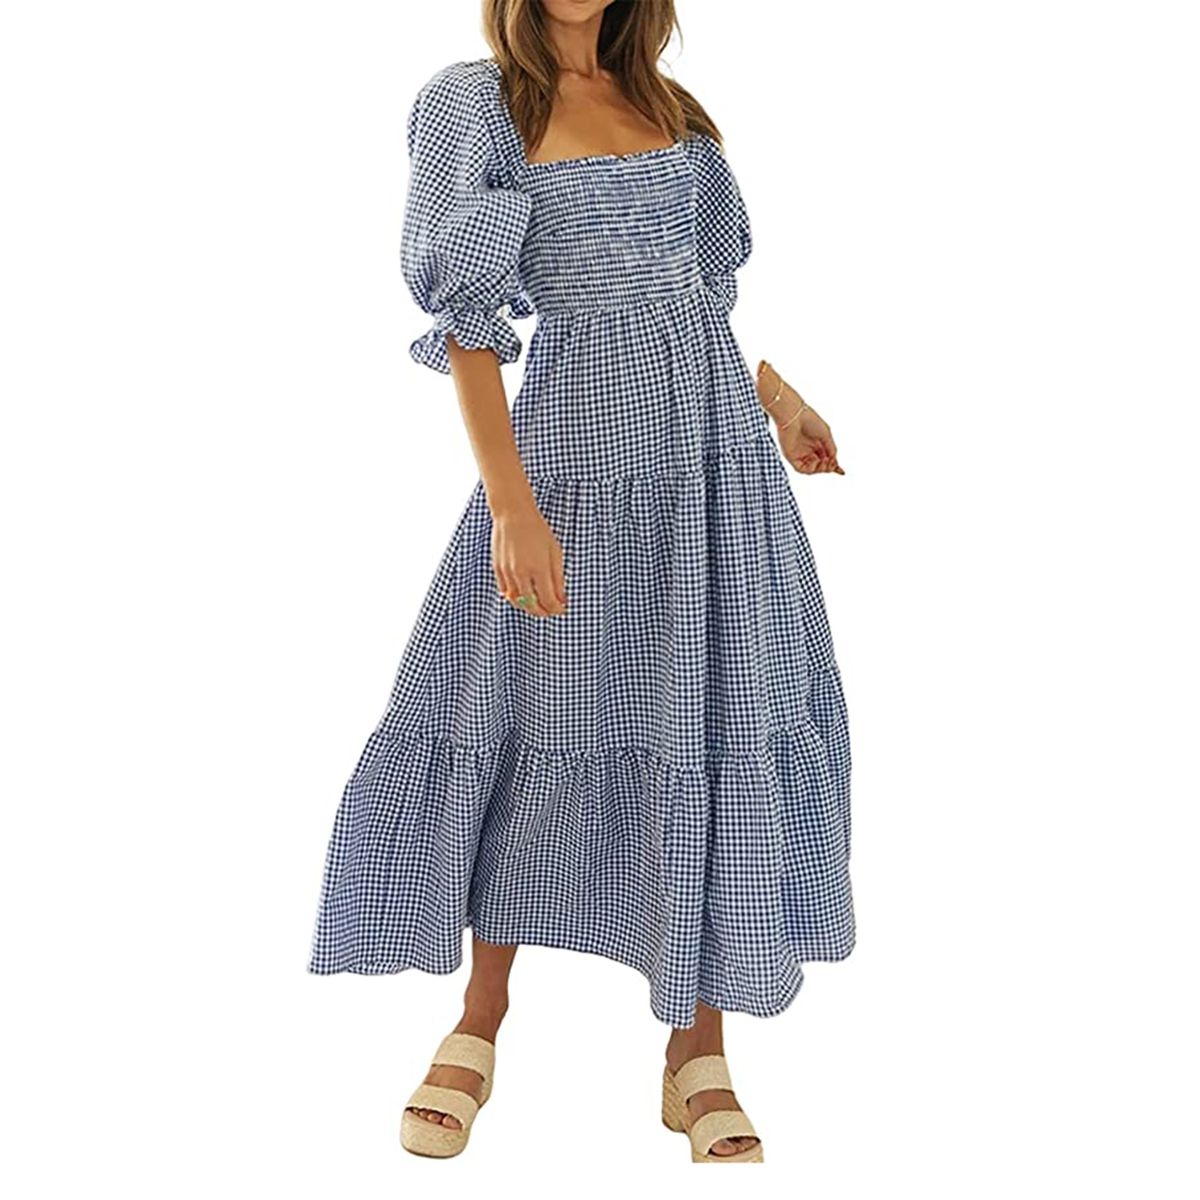 R.Vivimos Women's Summer Cotton Plaid Puff Sleeves Bow Casual Off-Shoulder Boho Midi Dress 3.8 out of 5 stars